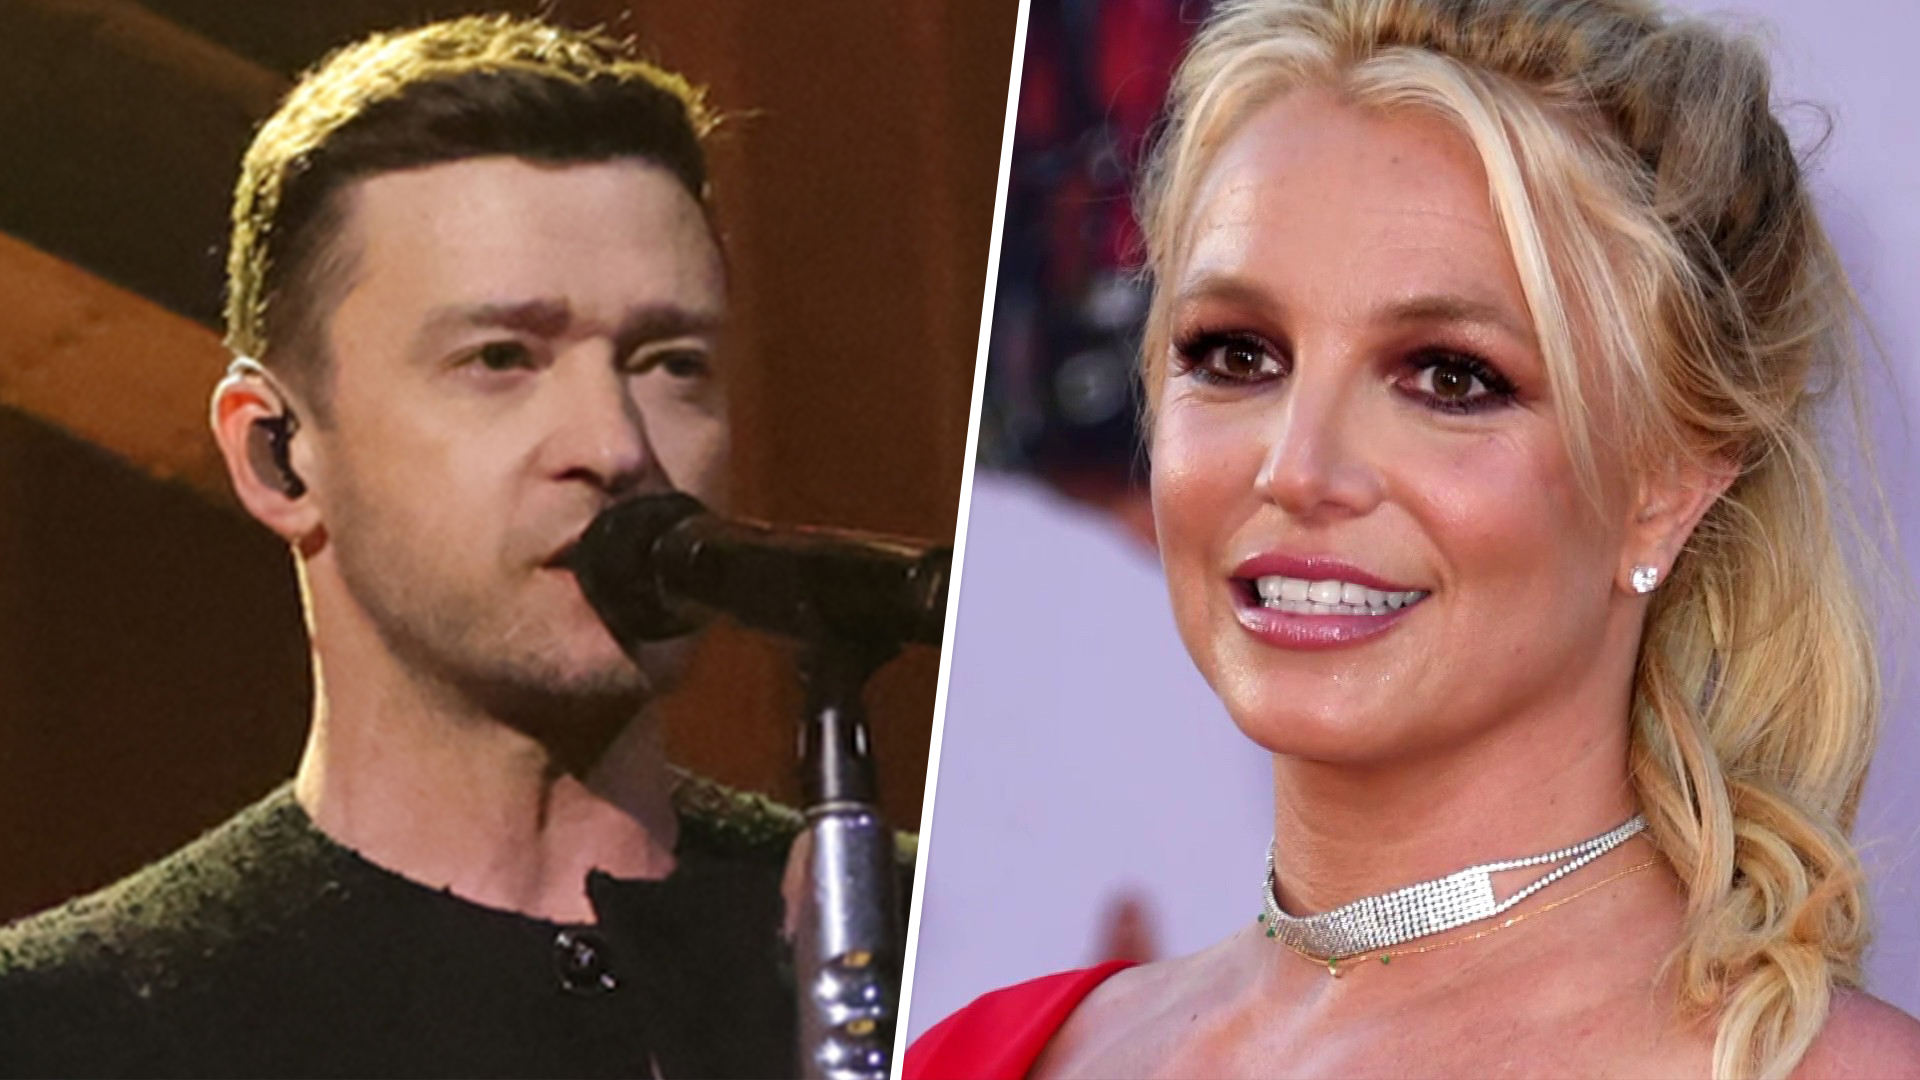 Britney Spears responds to new Justin Timberlake music